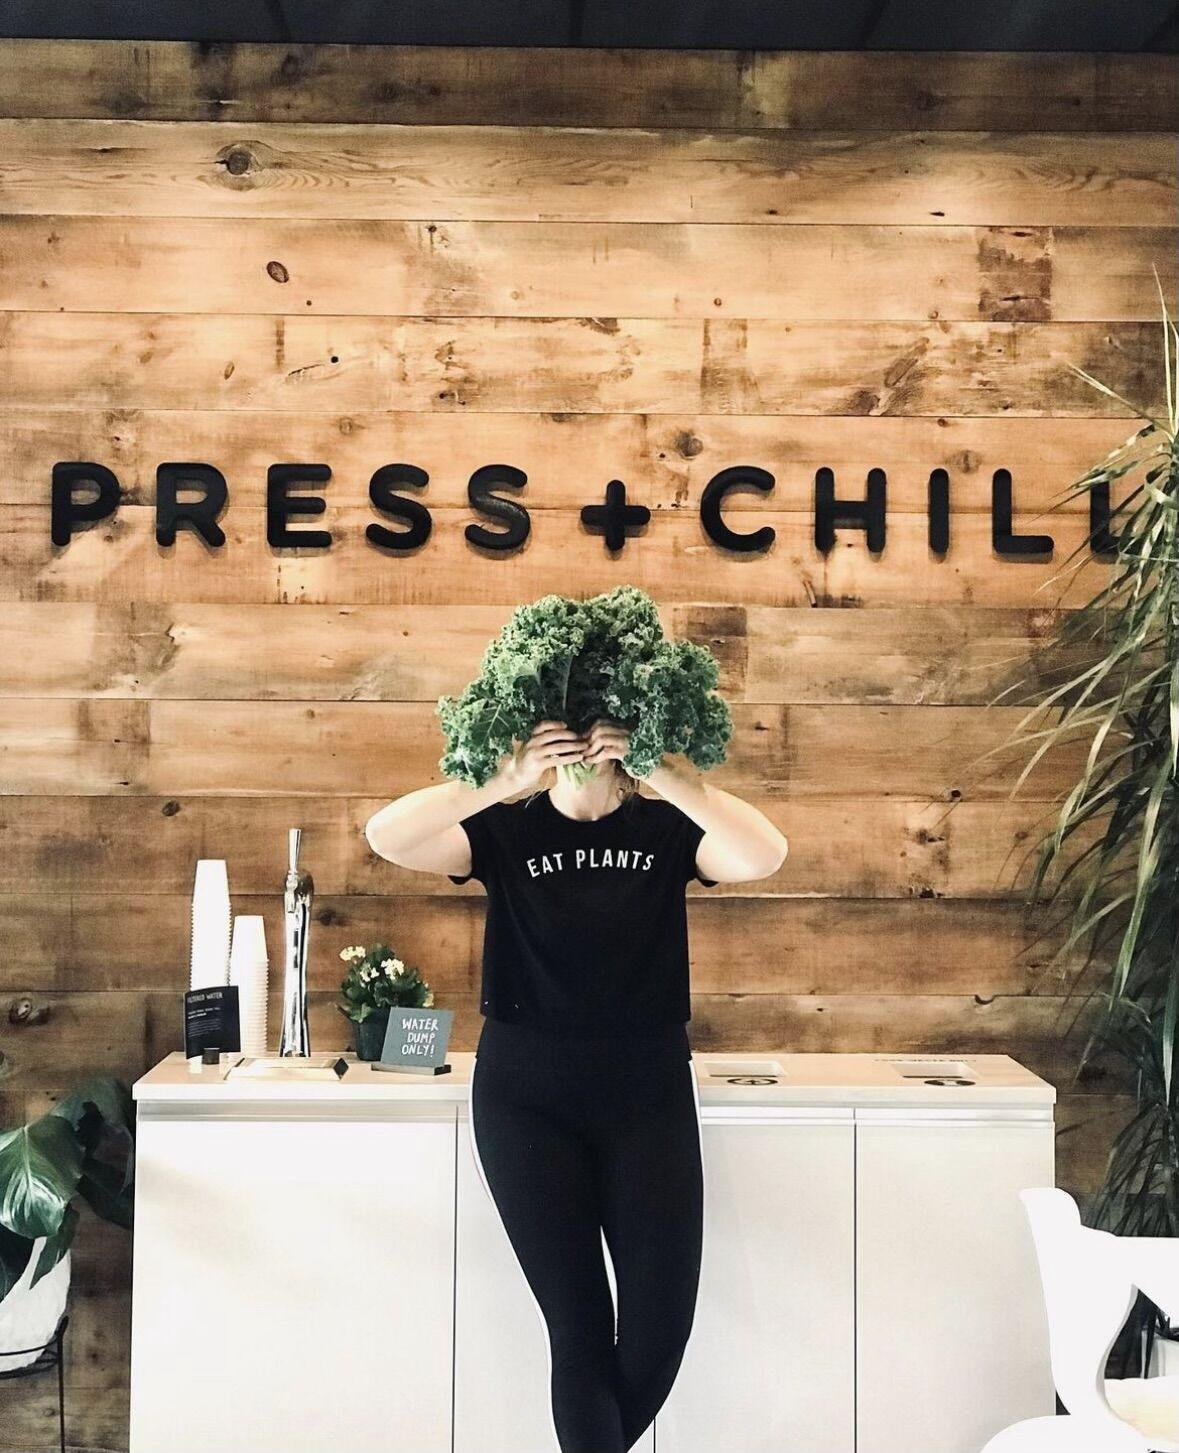 Kimberly Hoffmann holding a plant in front of her face. A sign on the wall behind them "Press + Chill".